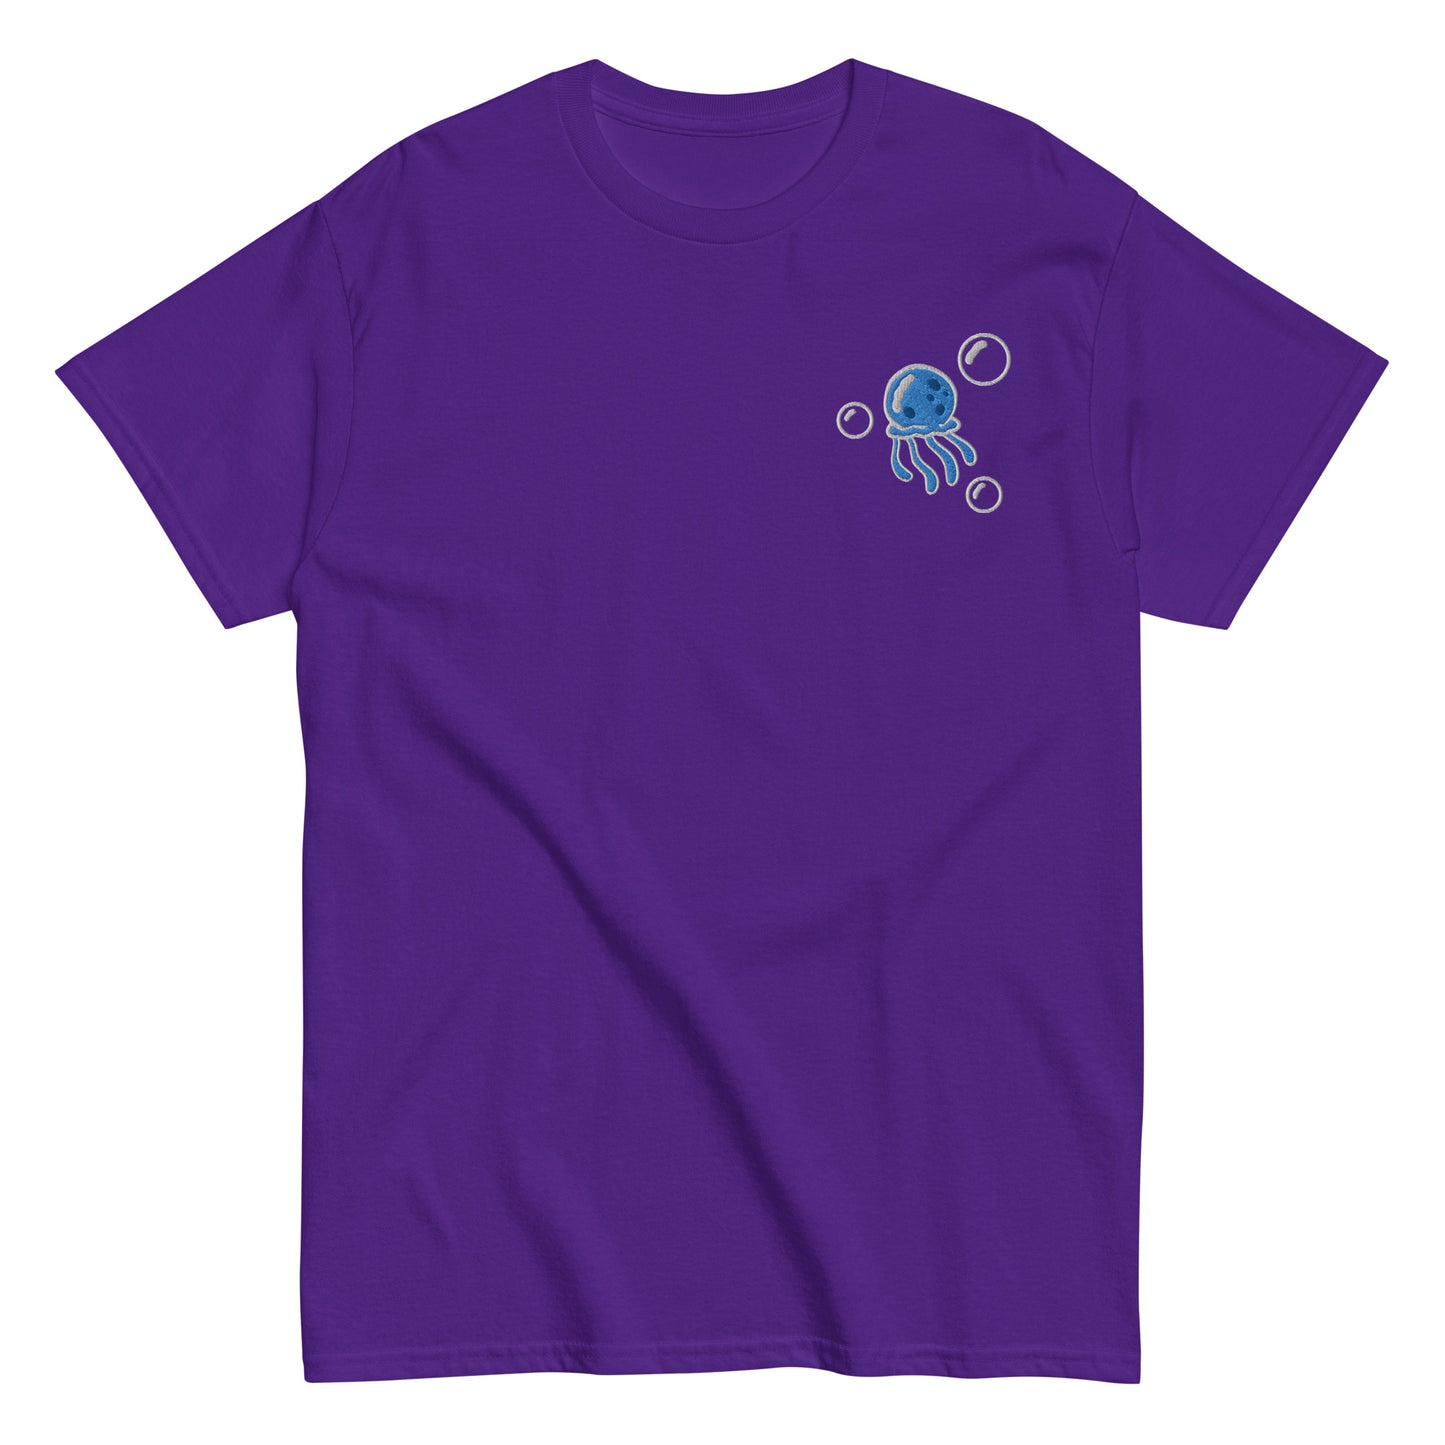 Jellyfish BLUE embroidered t-shirt